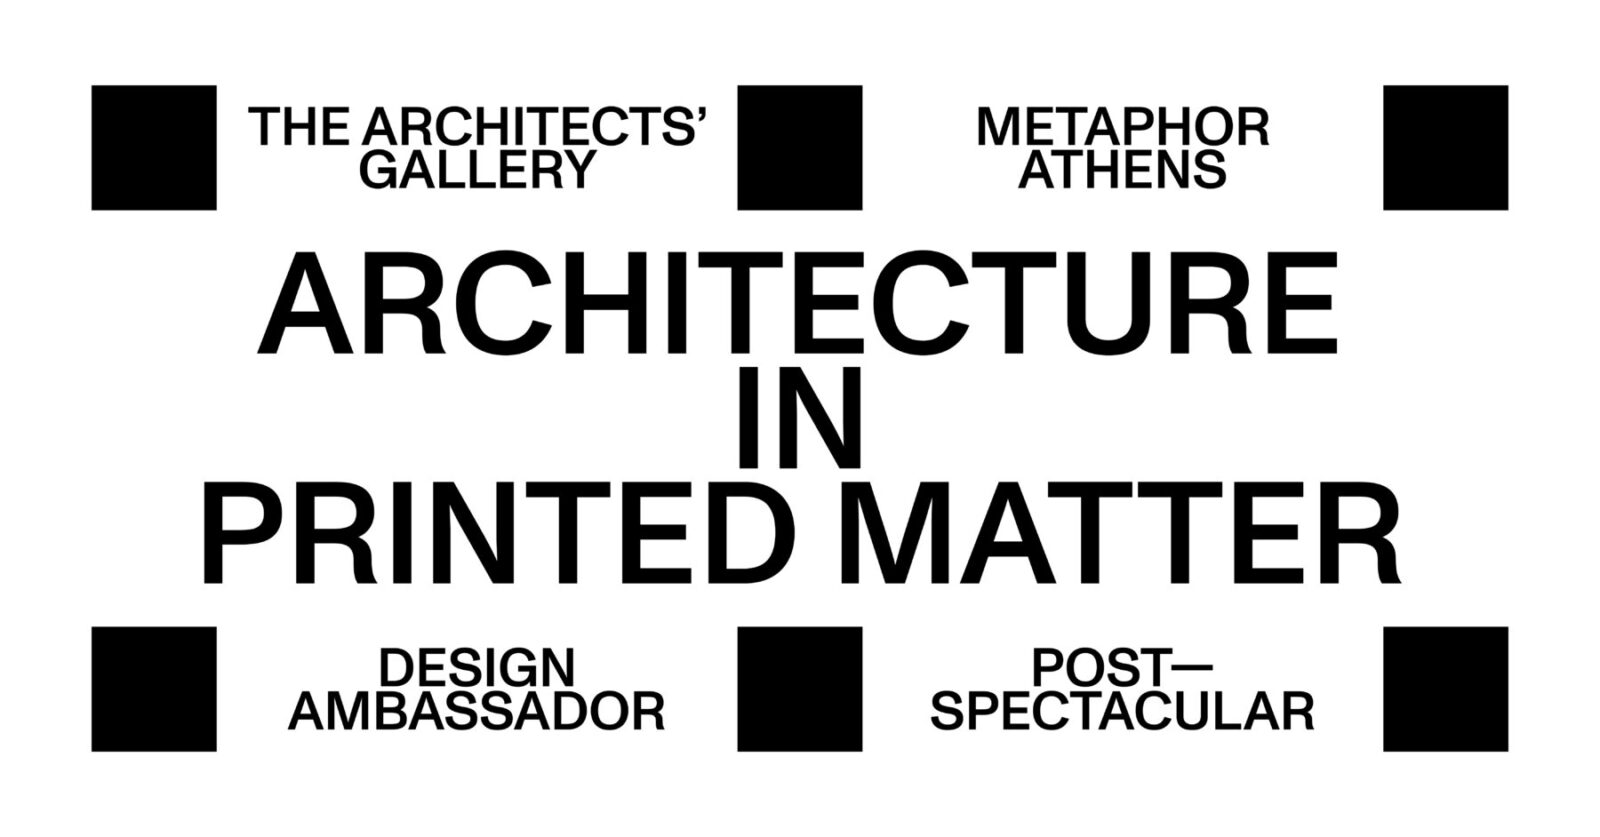 Archisearch Archisearch the Paper Edition - Exhibition The Architects’ Gallery X Metaphor Athens Design Ambassador X Post-Spectacular Office